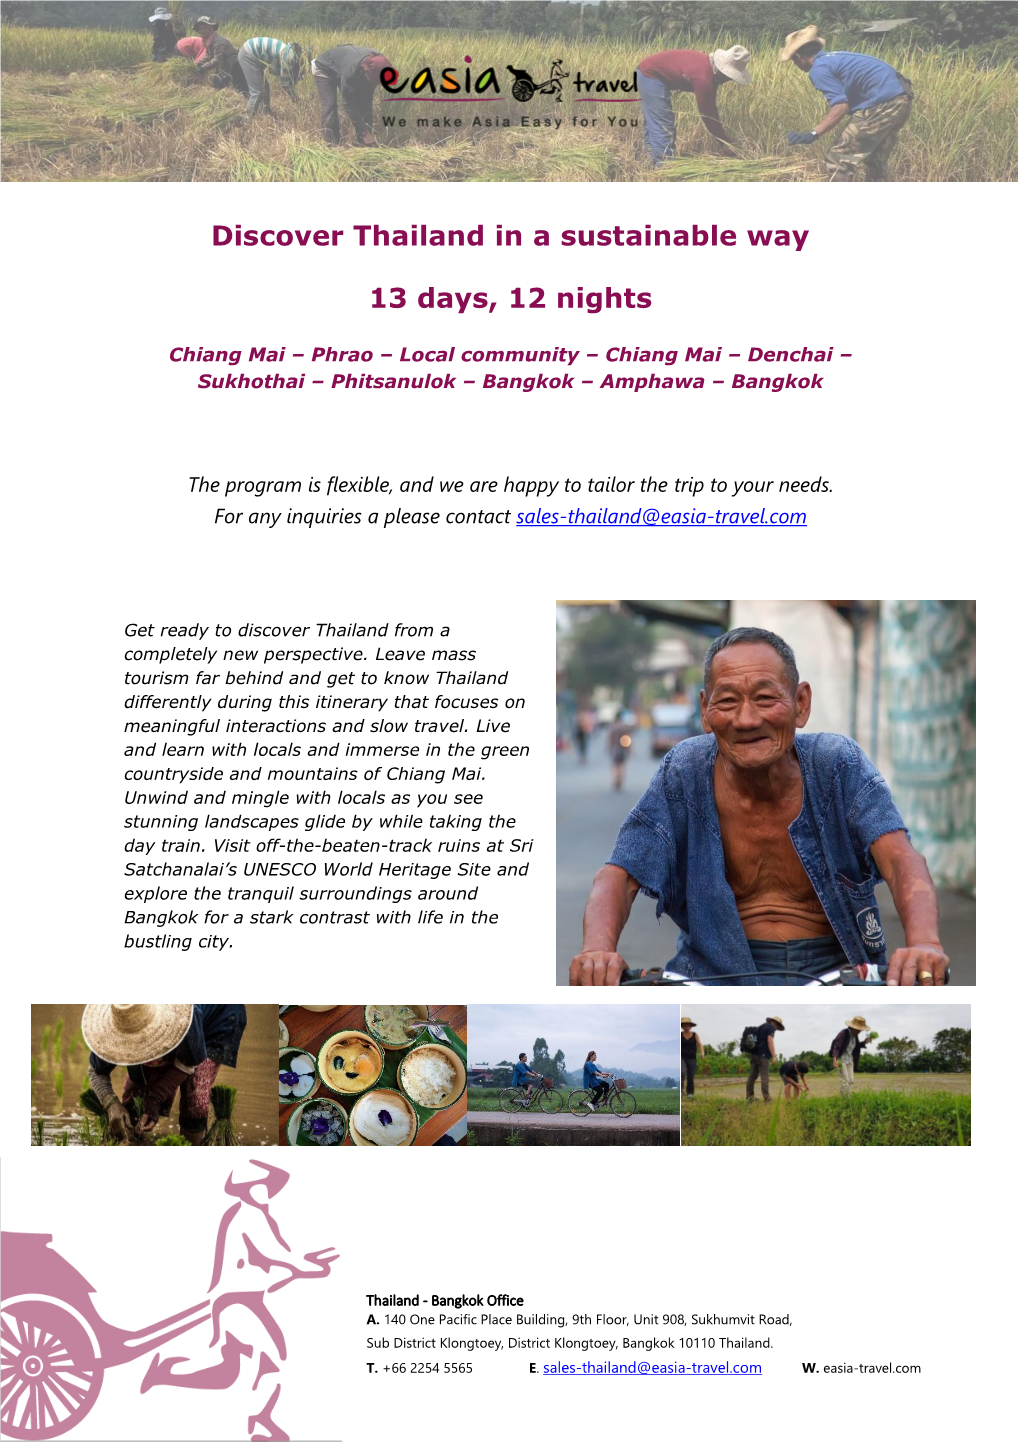 Discover Thailand in a Sustainable Way Tourlink